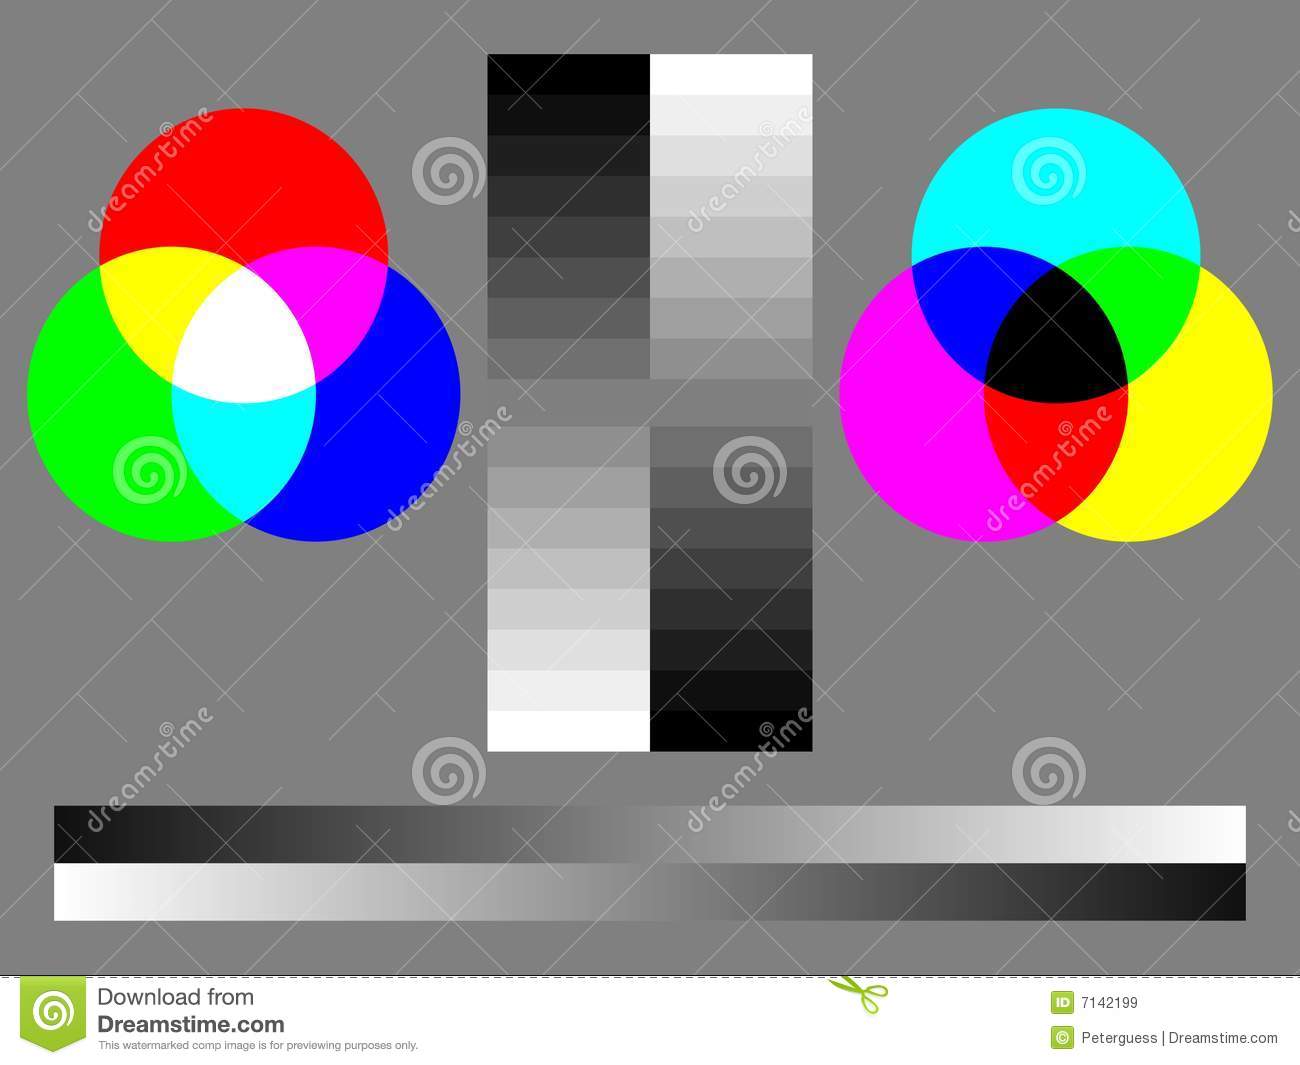 vision color picture style download free